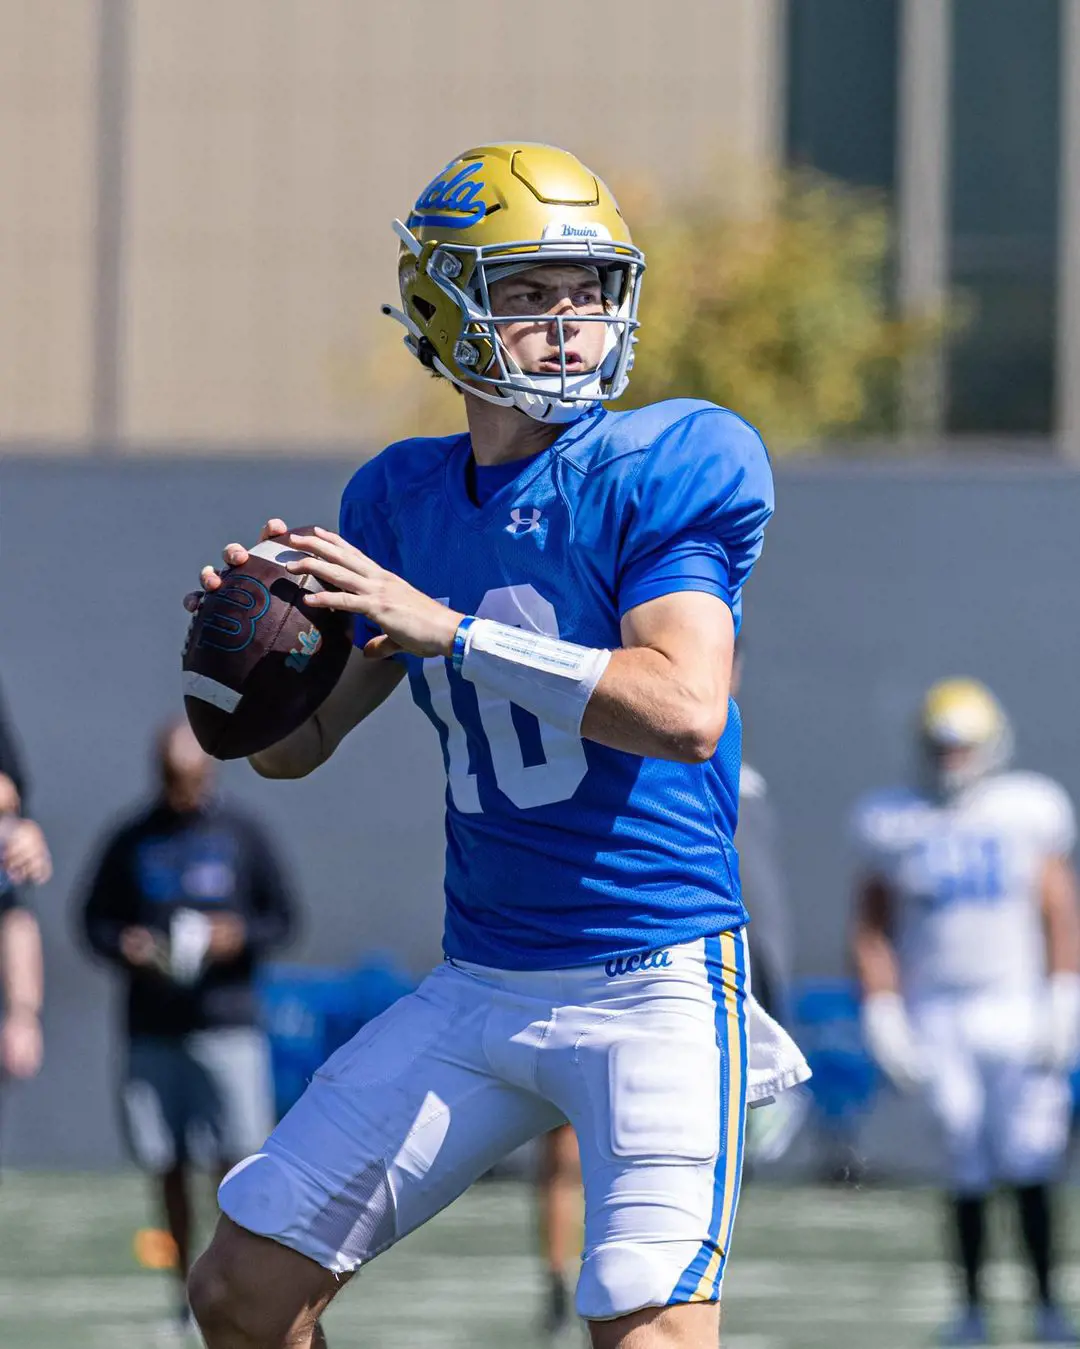 Ethan finalized his transfer from the Washington Huskies to the UCLA Bruins in December of 2020.